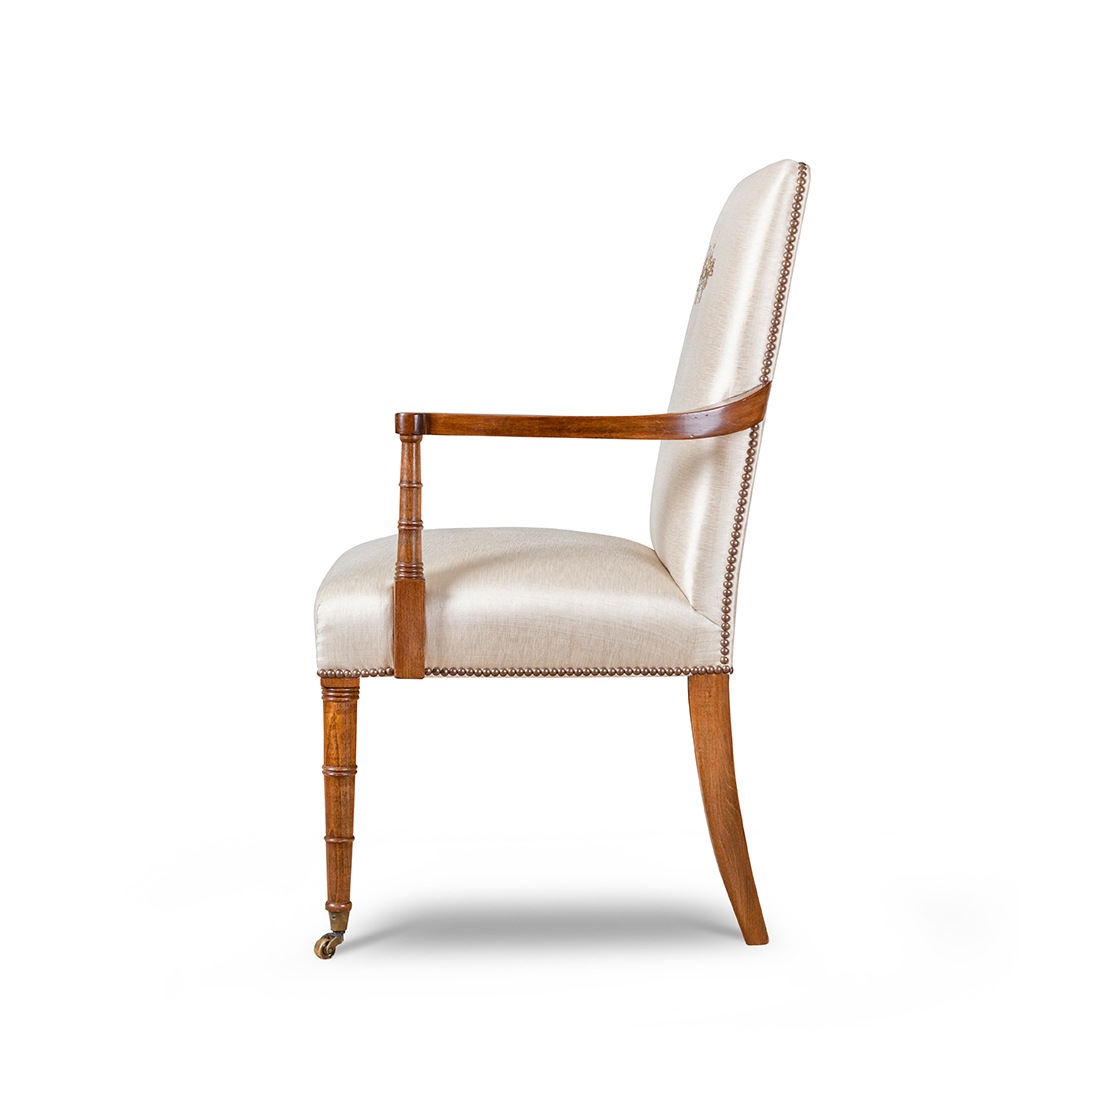 Pavilion carver dining chair with Cellini embroidery in Lagan silk - Oyster - Beaumont & Fletcher